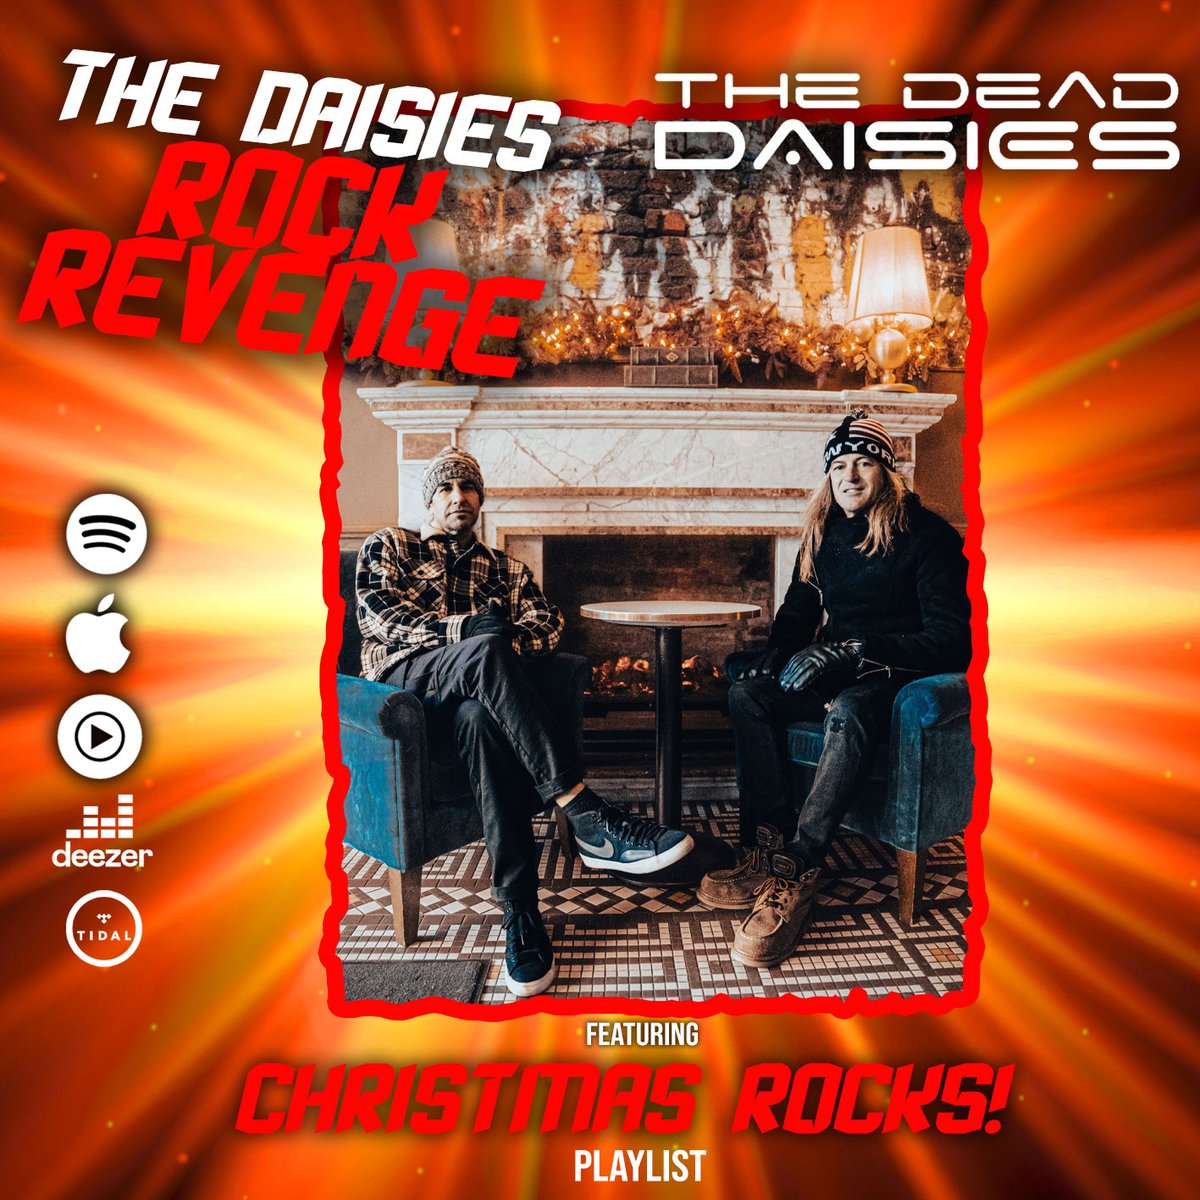 Christmas Rocks & we've got a playlist for you to stream nice and loud!!🤘🤘

thedeaddaisies.com/daisies-rock-r…

#TheDeadDaisies #TheDaisiesRockRevenge #ChristmasRocks